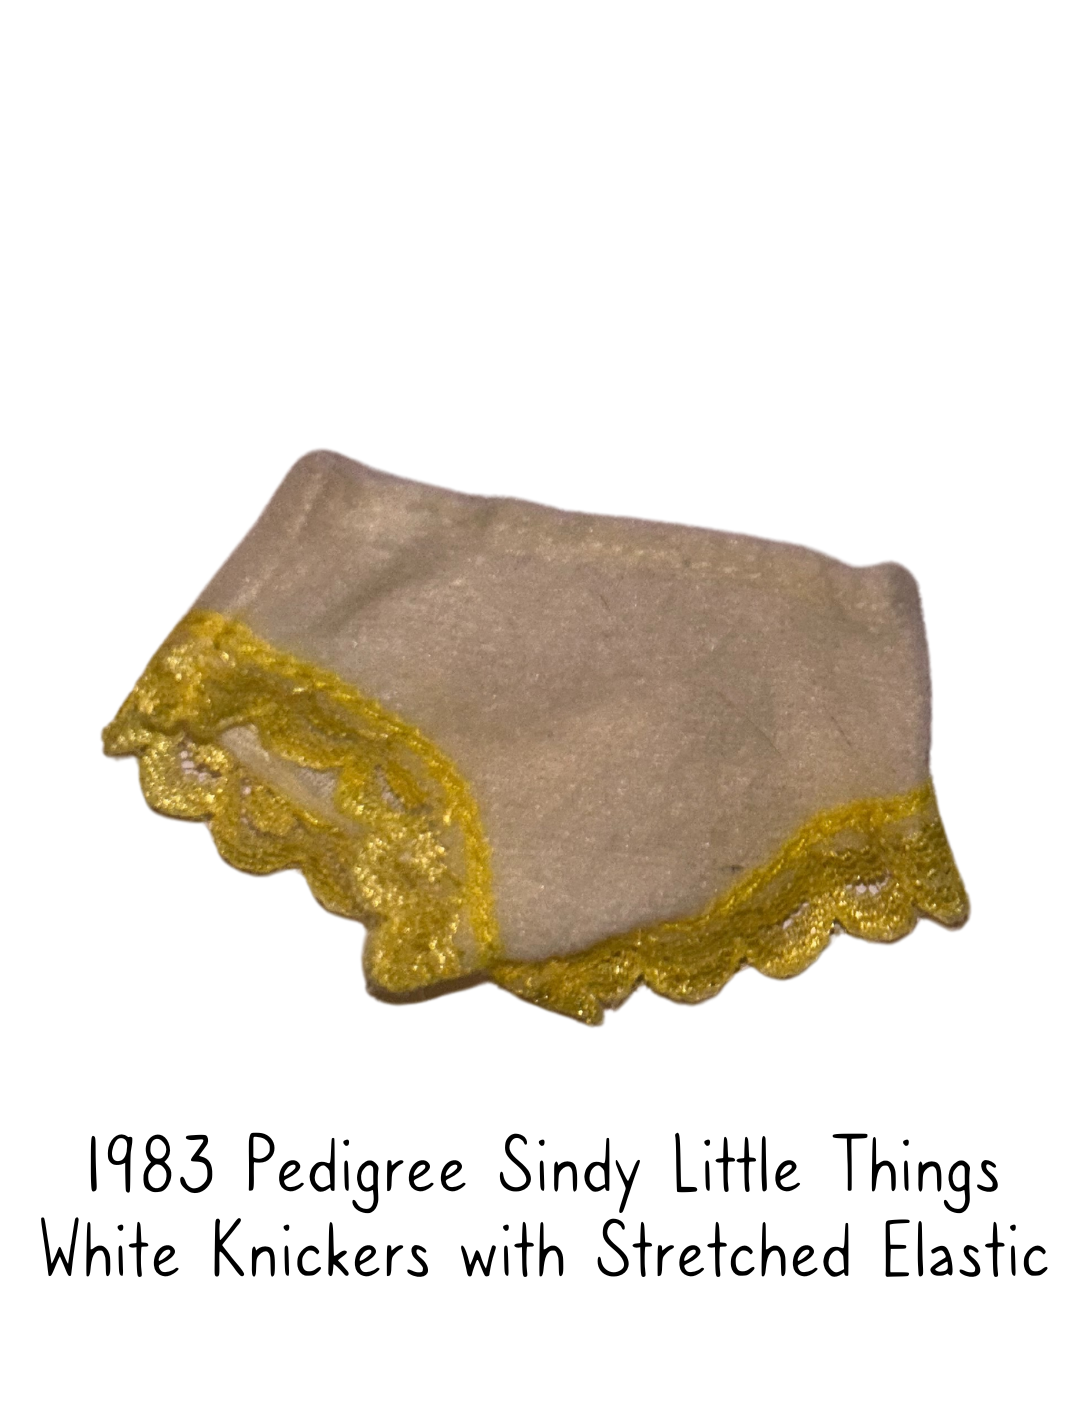 1983 Pedigree Sindy Little Things Lingerie White Knickers with Stretched Out Elastic